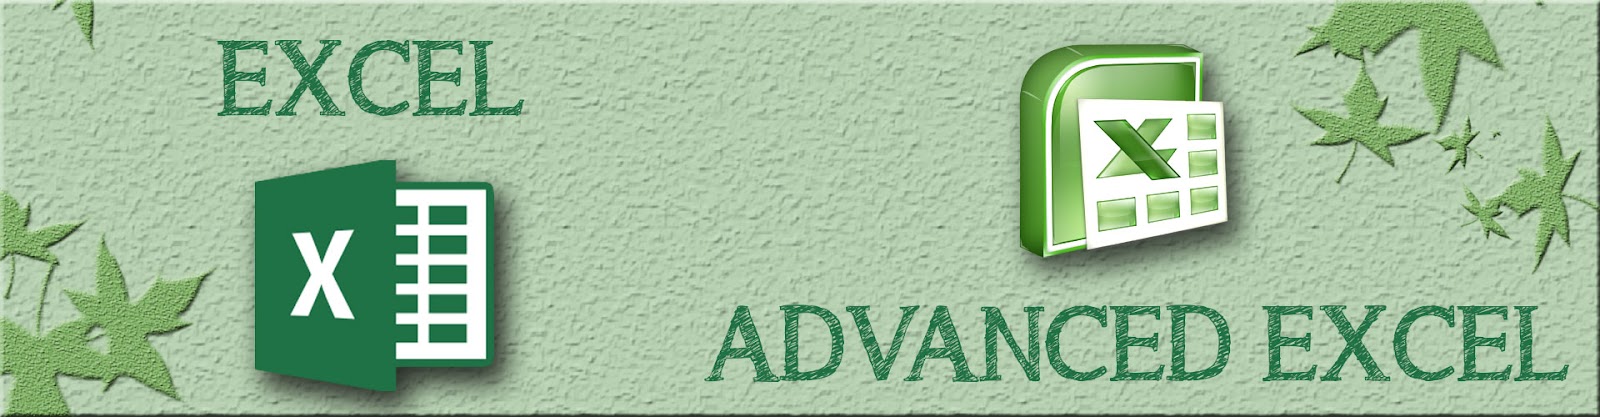 Advance excel training institute in-Chandigarh offered by CBitss Technologies sector 34A.